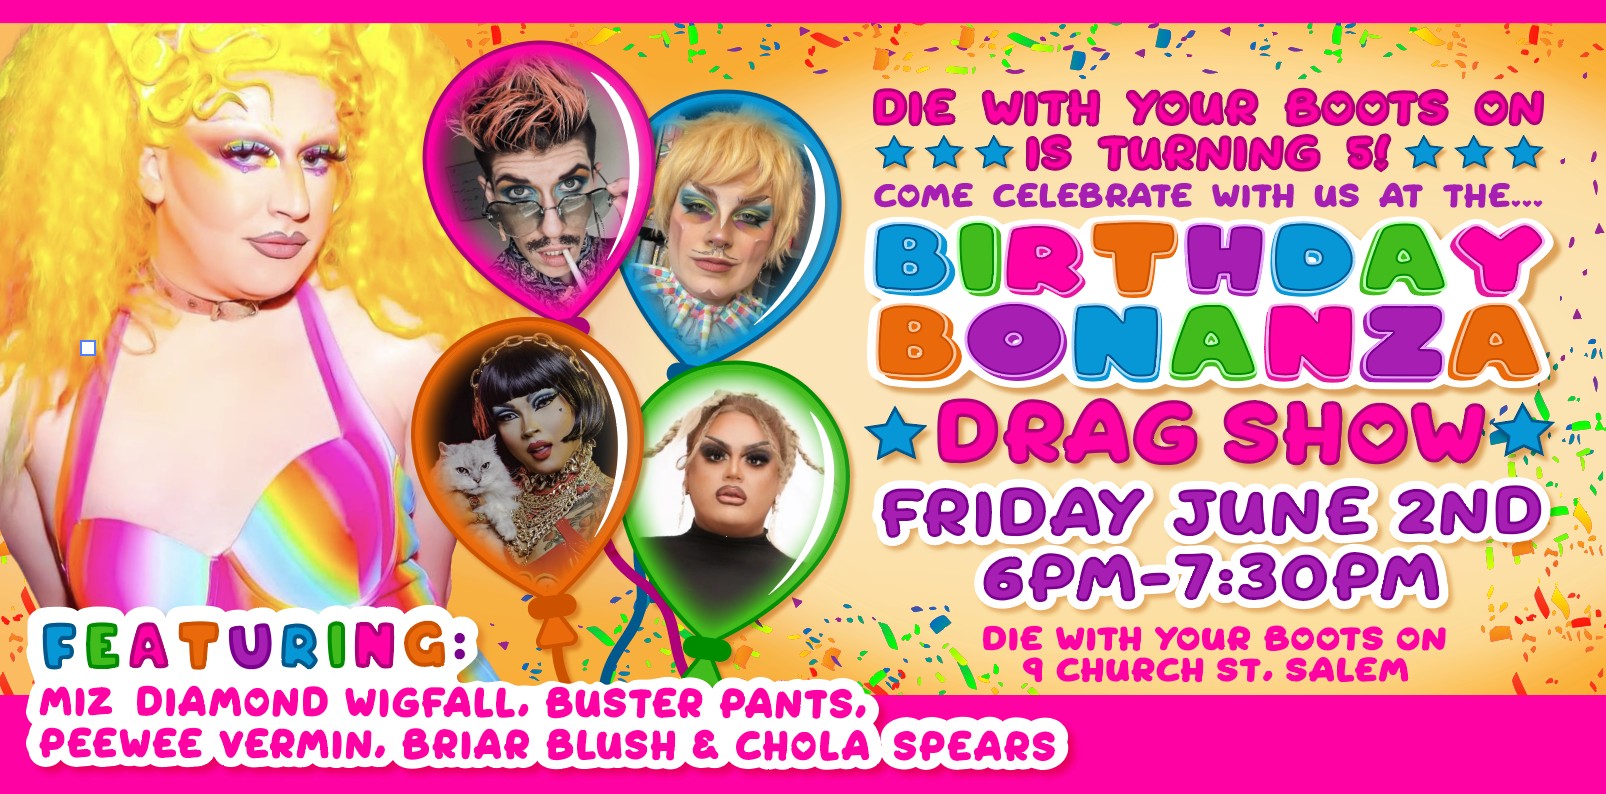 a poster for a birthday party with a drag show.